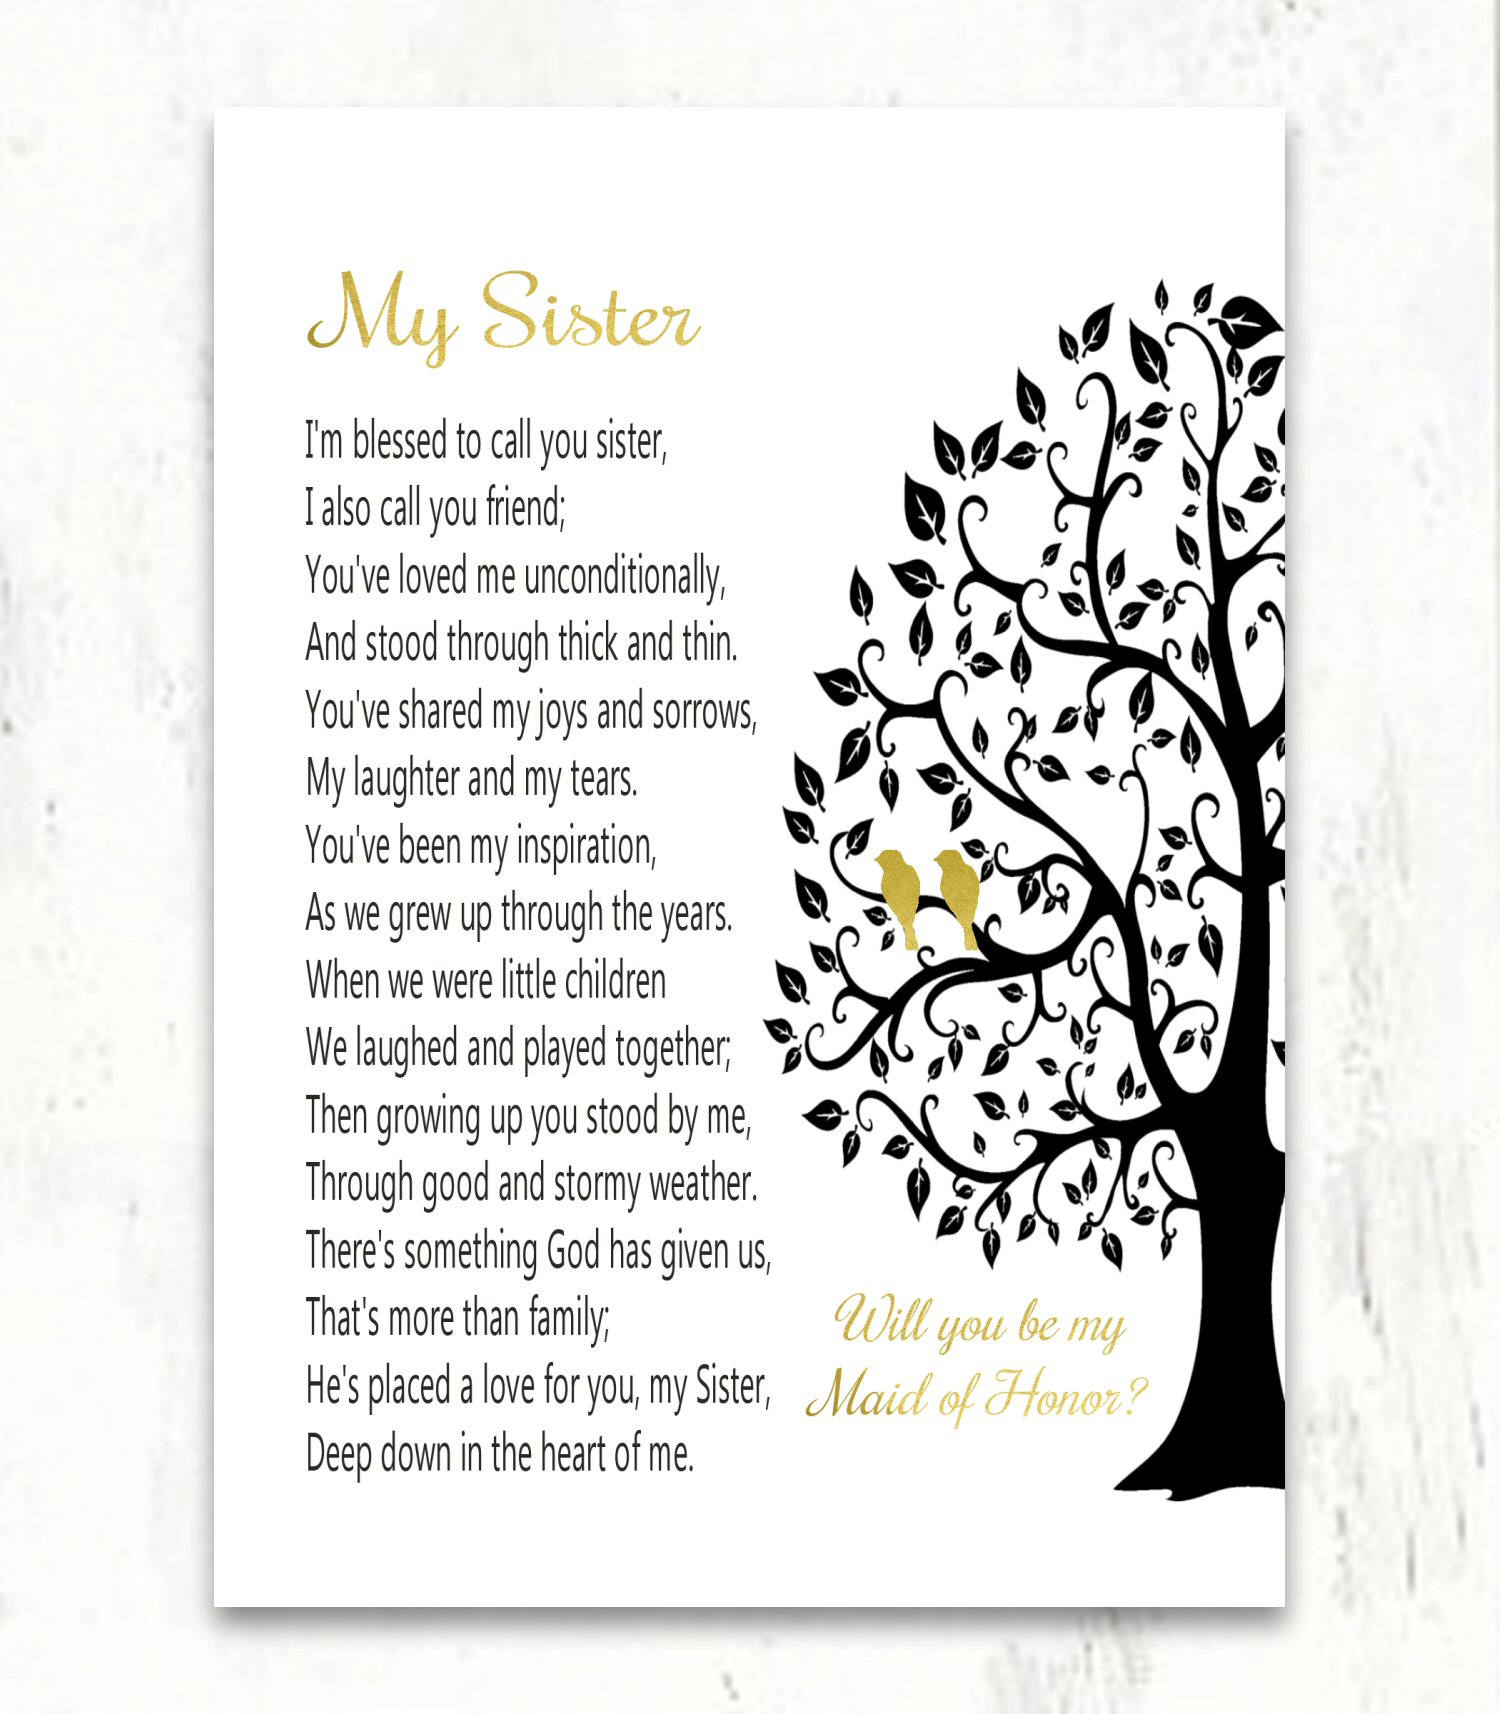 proposal-poem-sister-instant-download-card-editable-gld37-sister-will-you-be-my-maid-of-honor